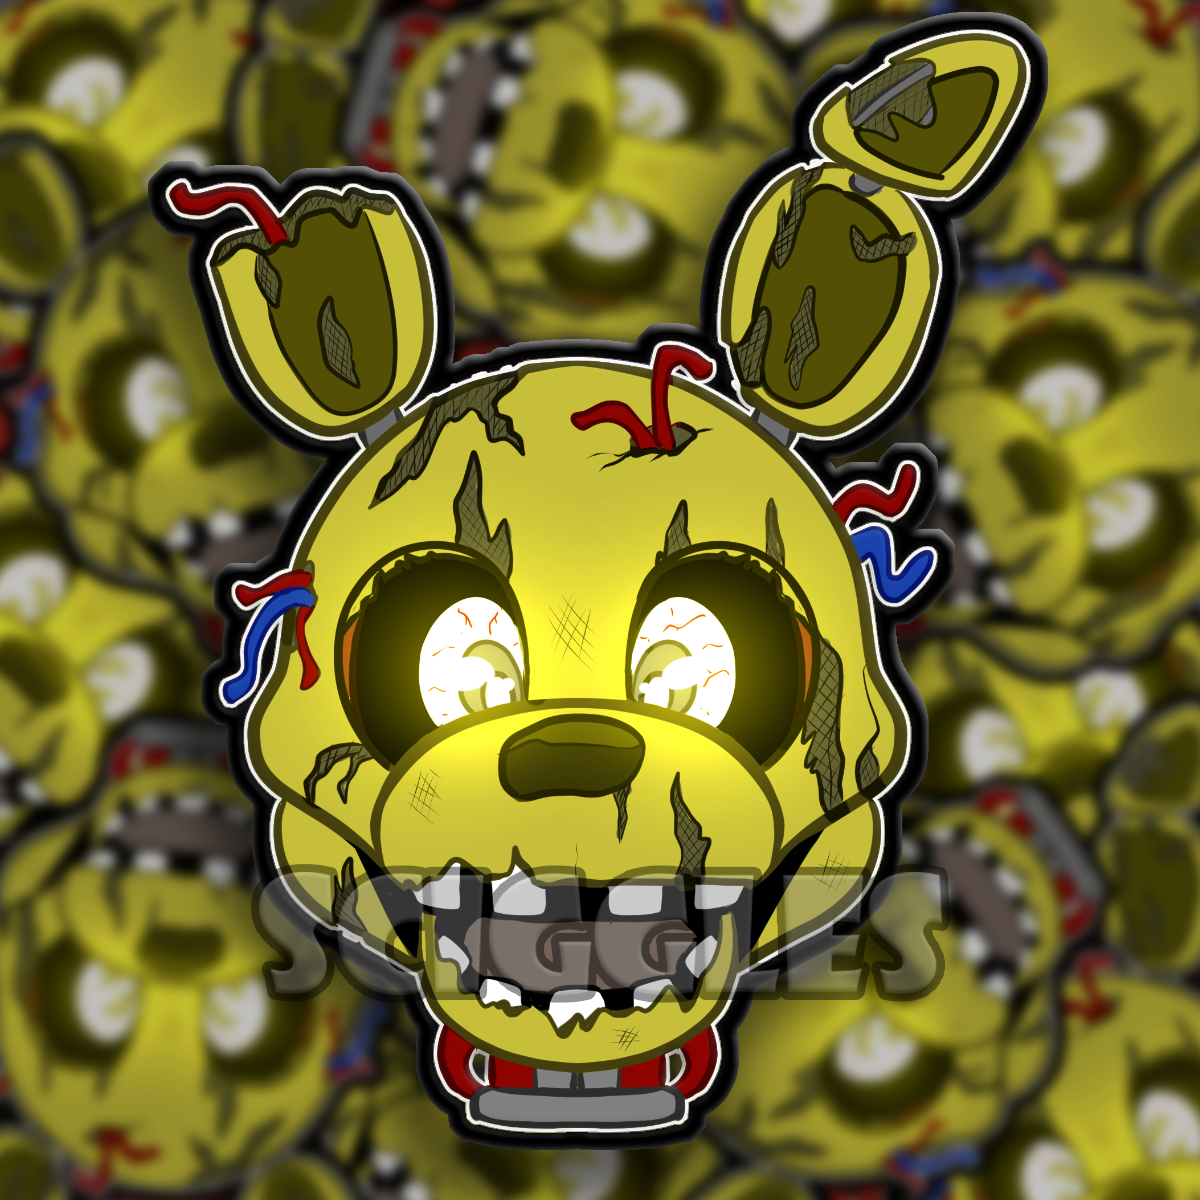 Five Nights at Freddy's - Toy Bonnie - It's Me - Springtrap - Sticker